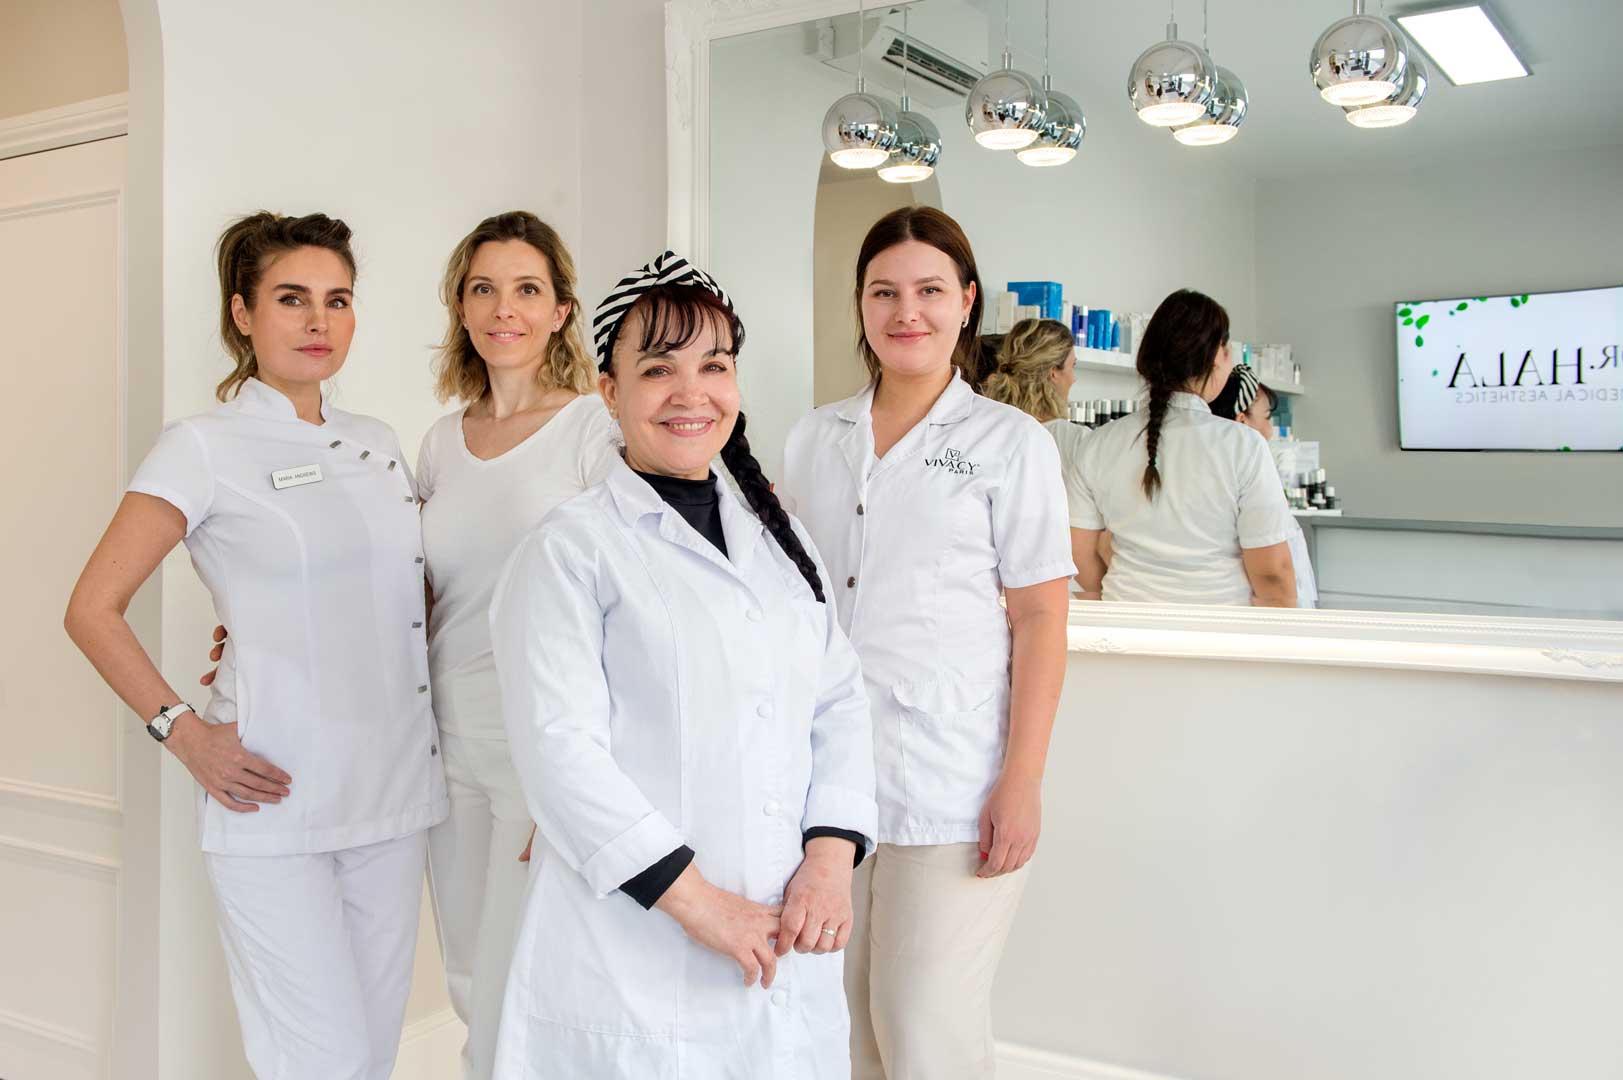 Fulham Health And Beauty: Dr Hala Medical Aesthetics – Be Happy In Your Own Body…